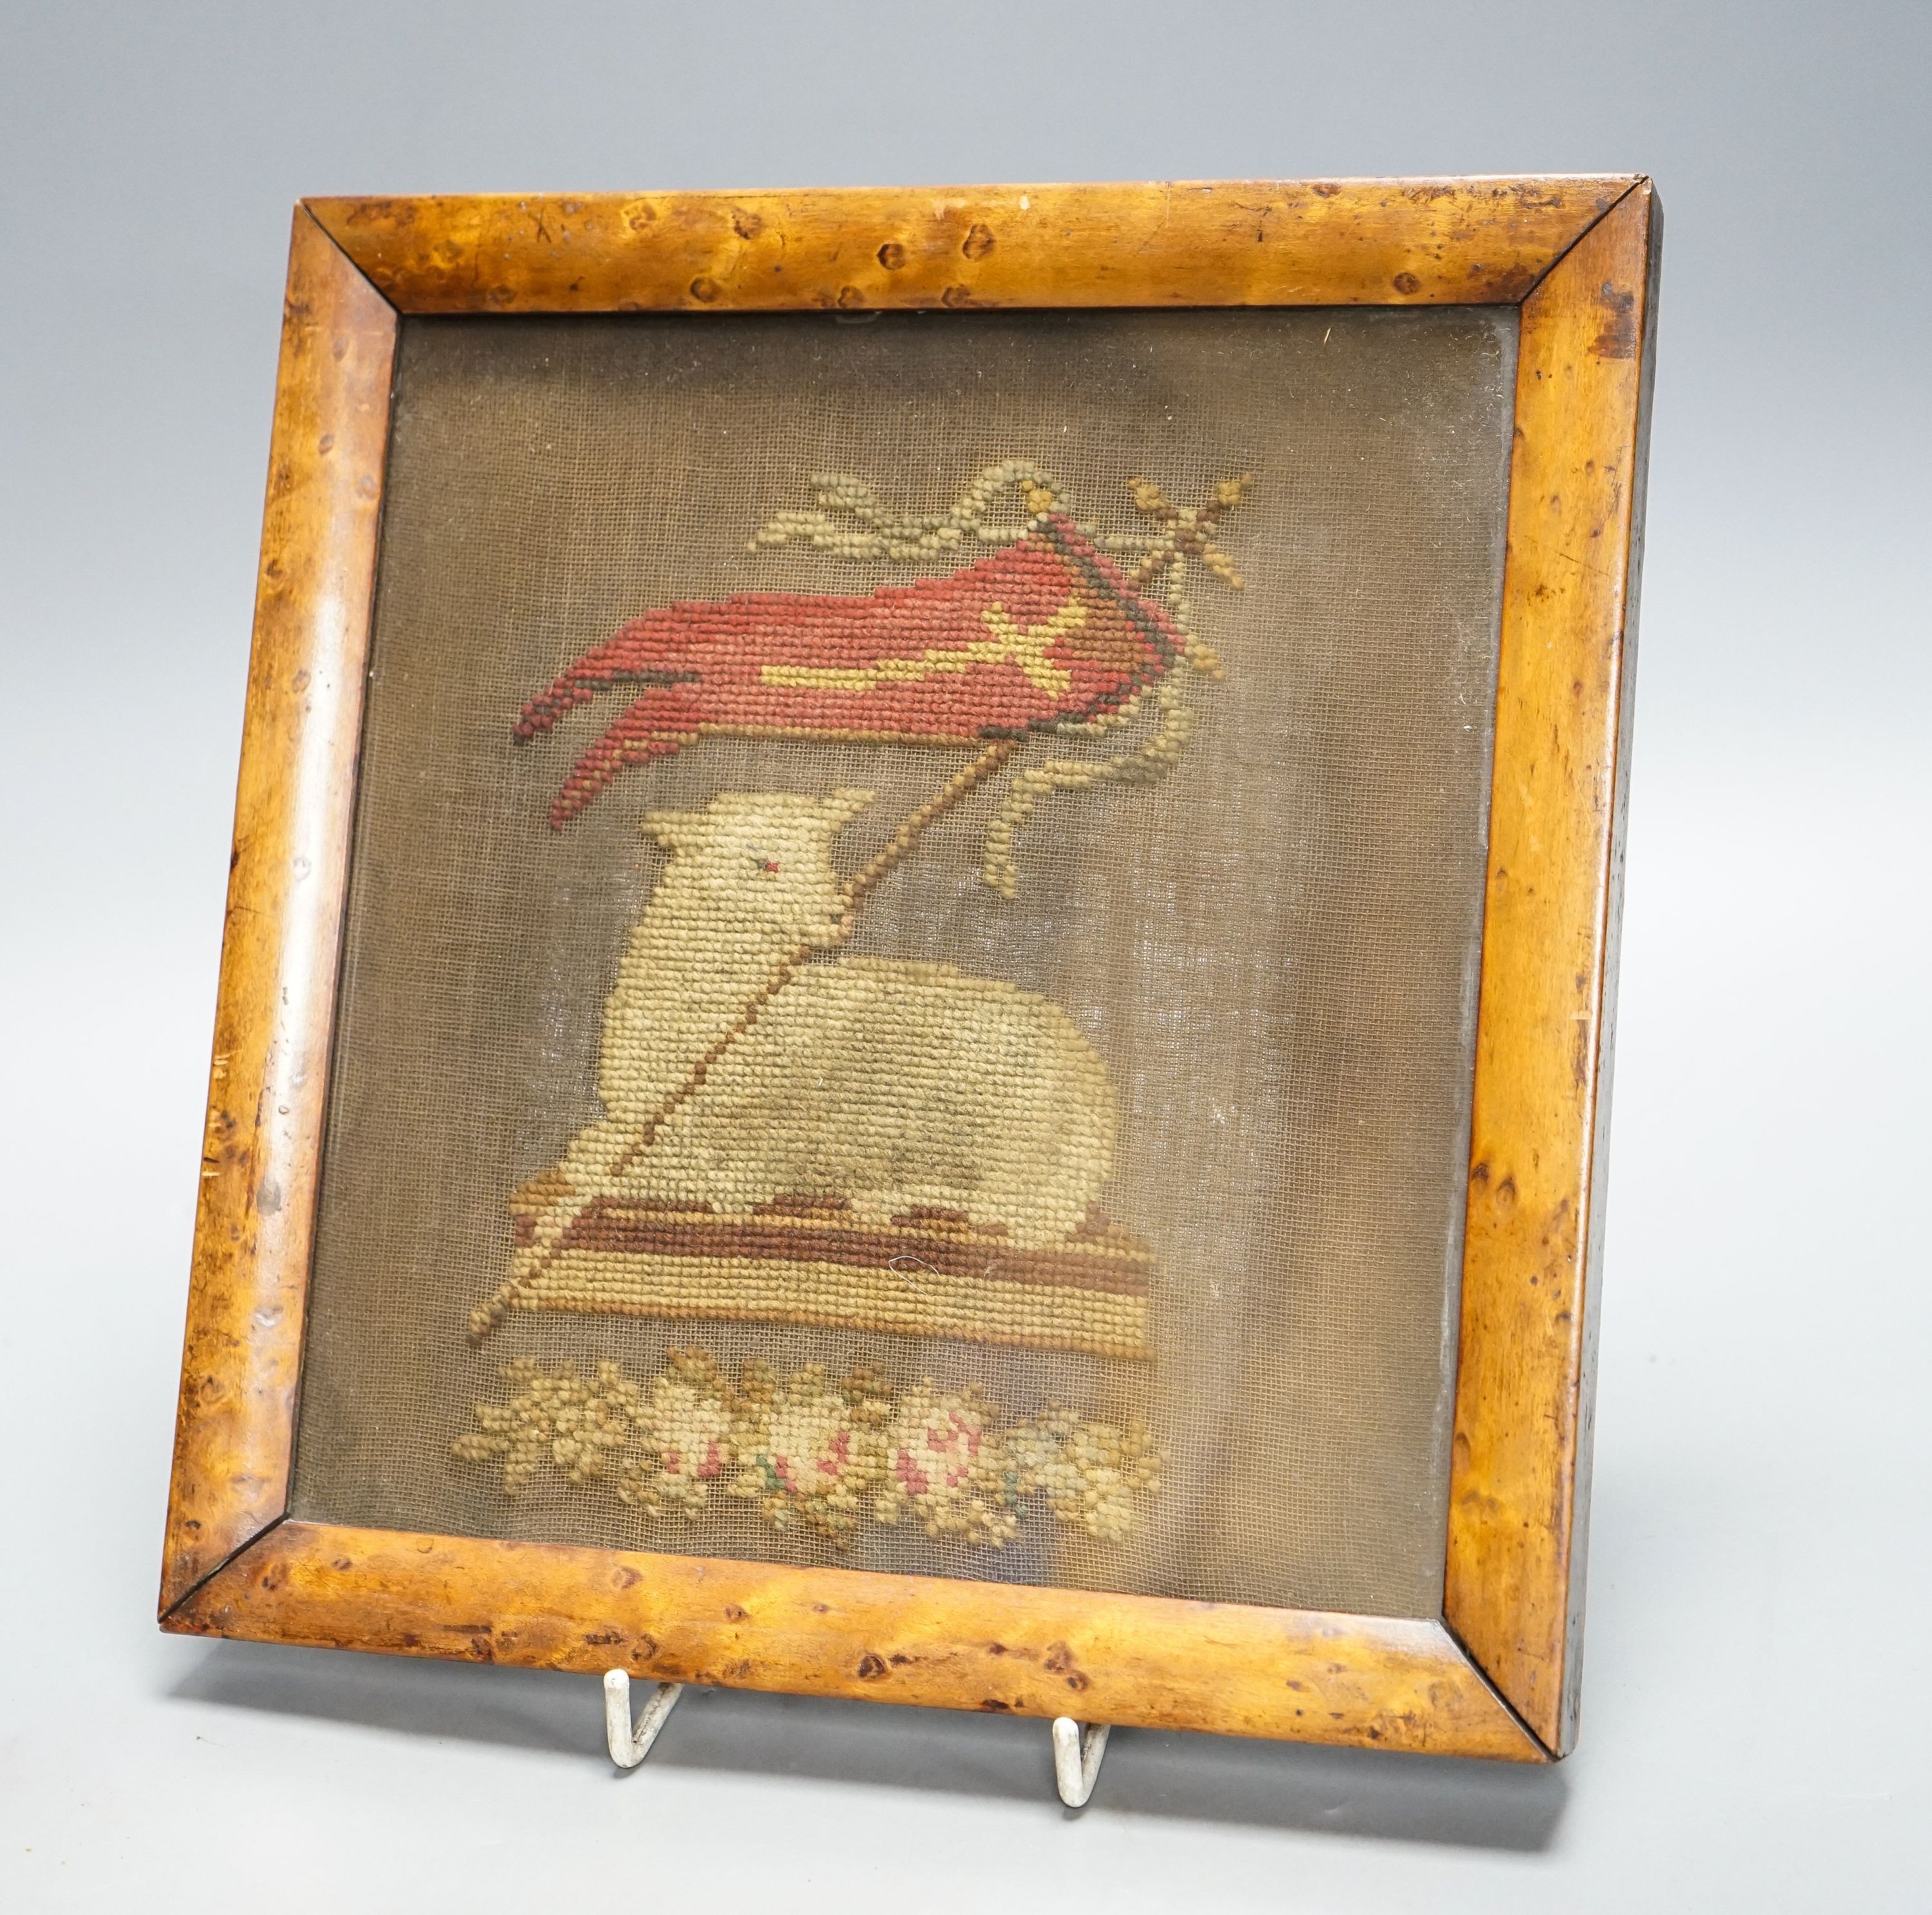 An early 19th century needlework of the Agnus Dei with the vexillum, incorporating a lamb and flag, in bird's eye maple frame 25x23cm incl frame